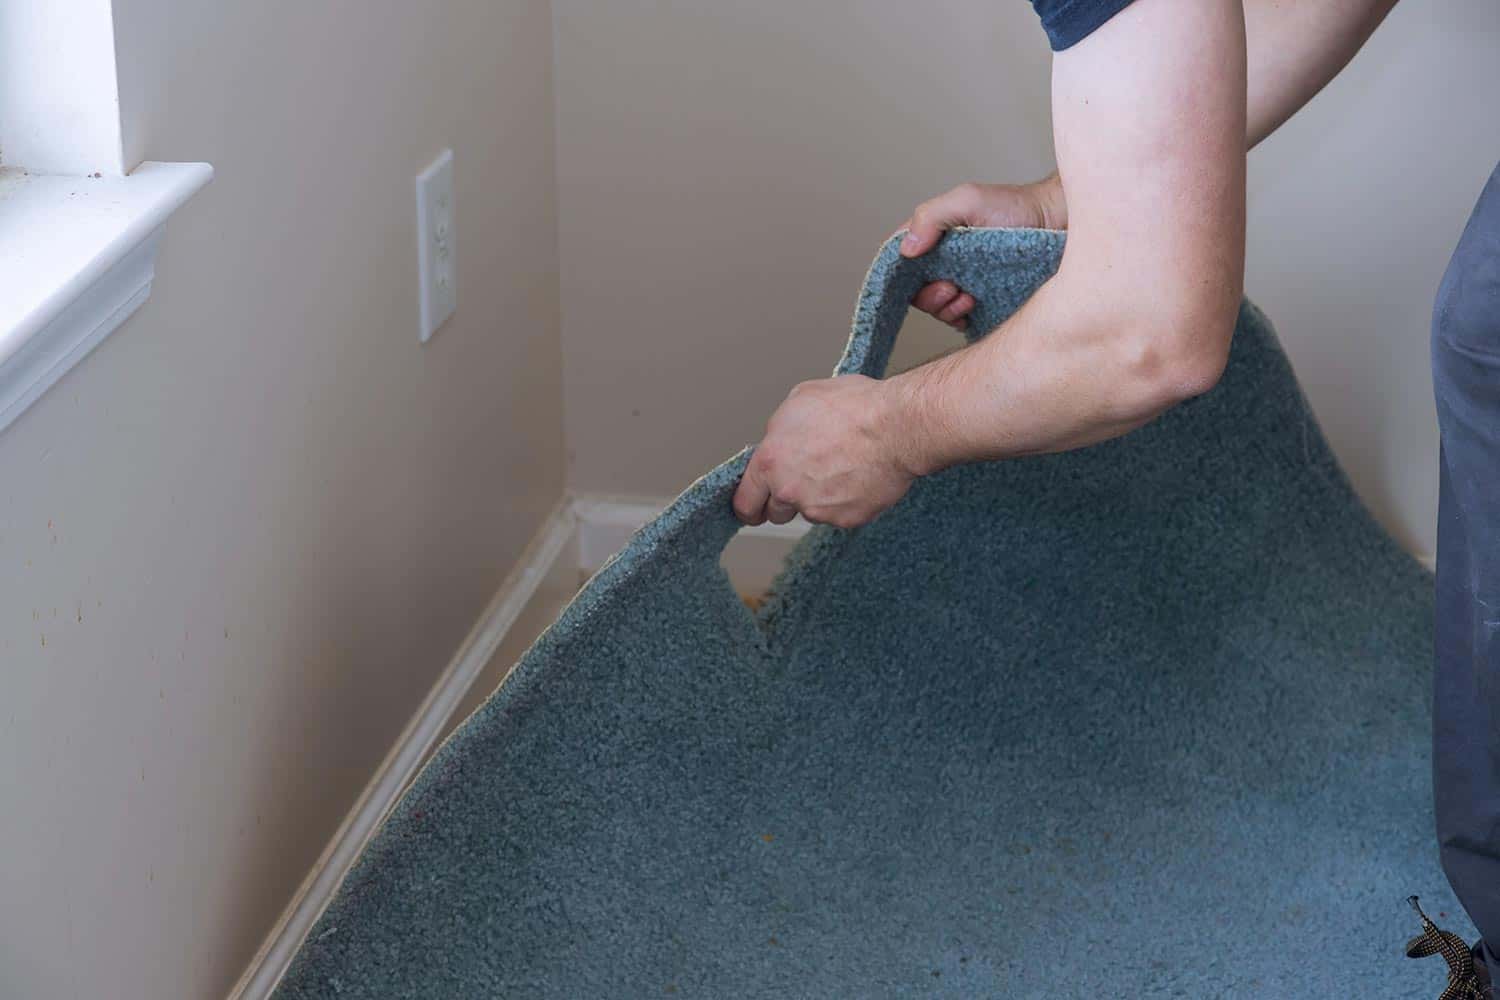 Professional worker removing a carpet for renovation works in a living room